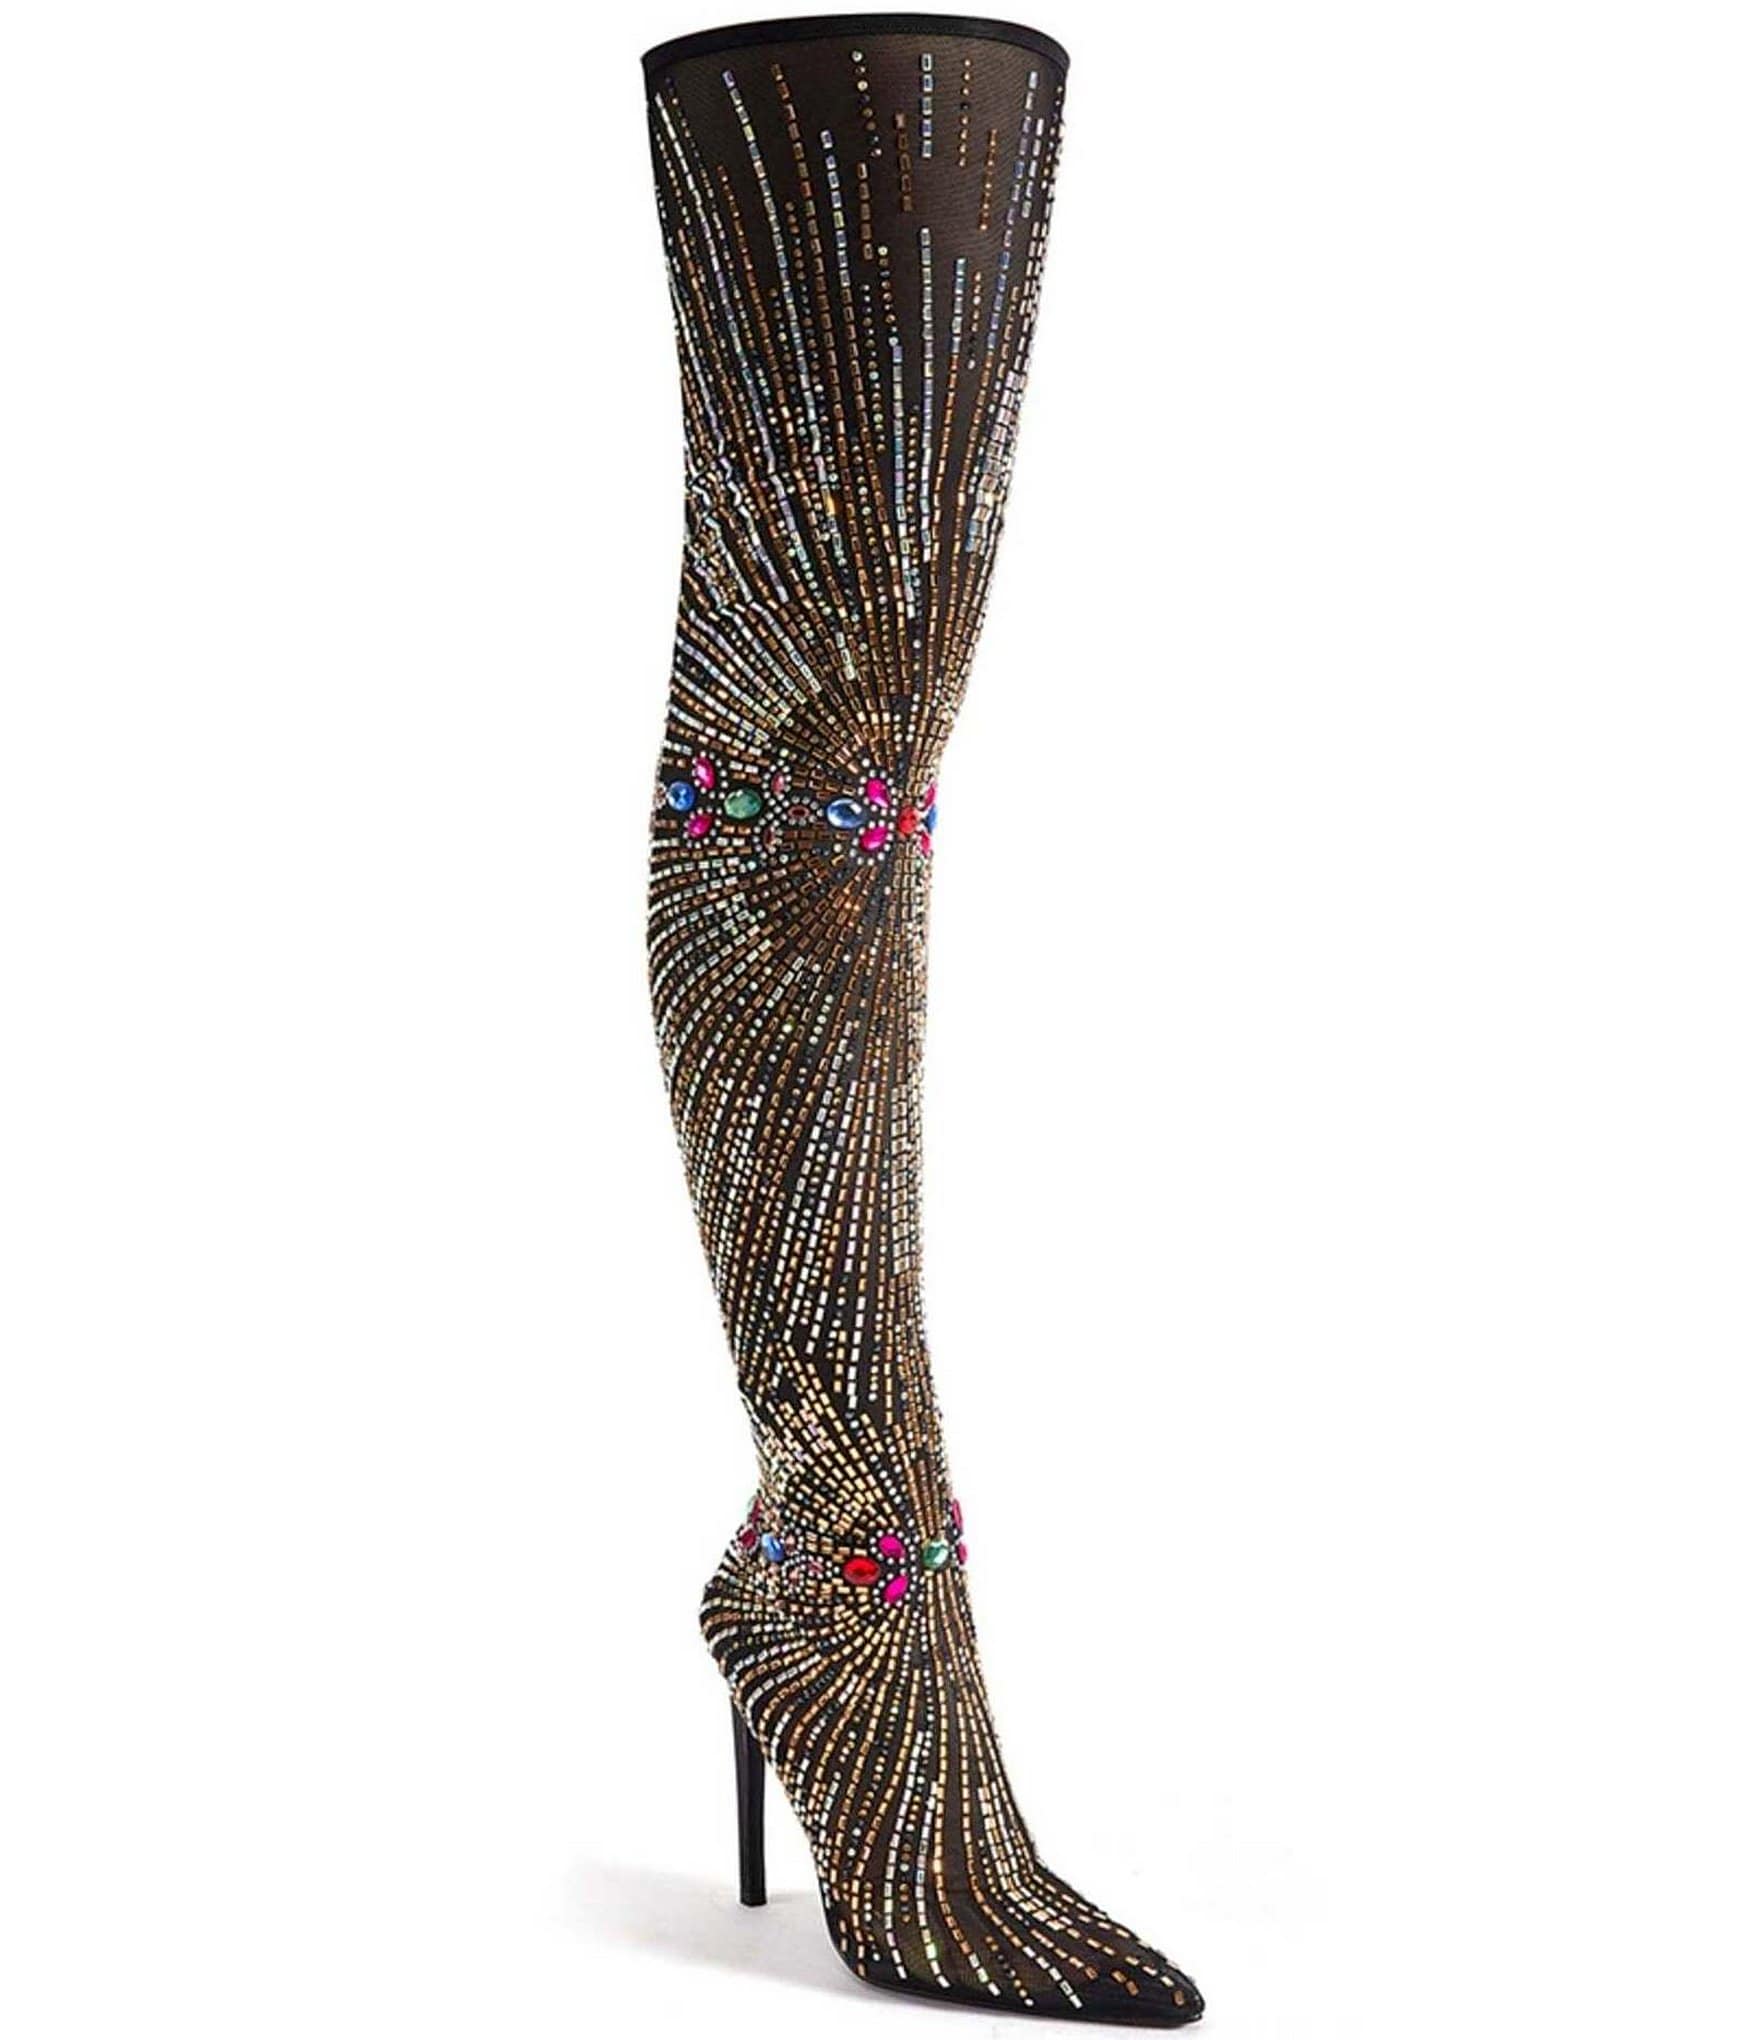 rhinestone boots: Women's Over the Knee Boots